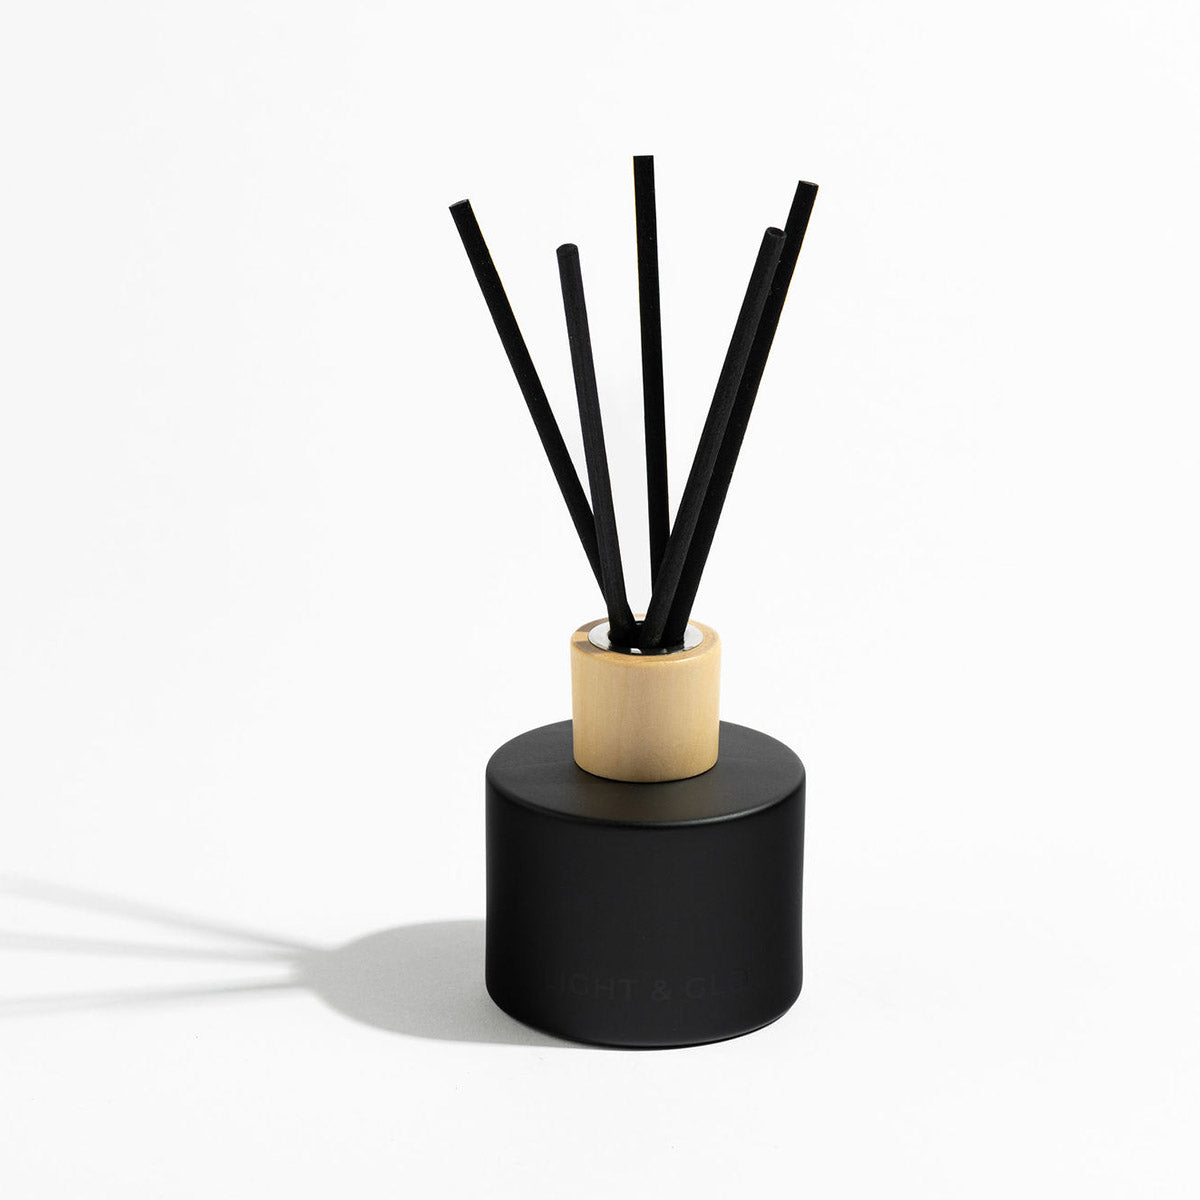 Vanilla Caramel - Monochrome Scent Diffuser | Luxury Candles & Home Fragrances by Light + Glo